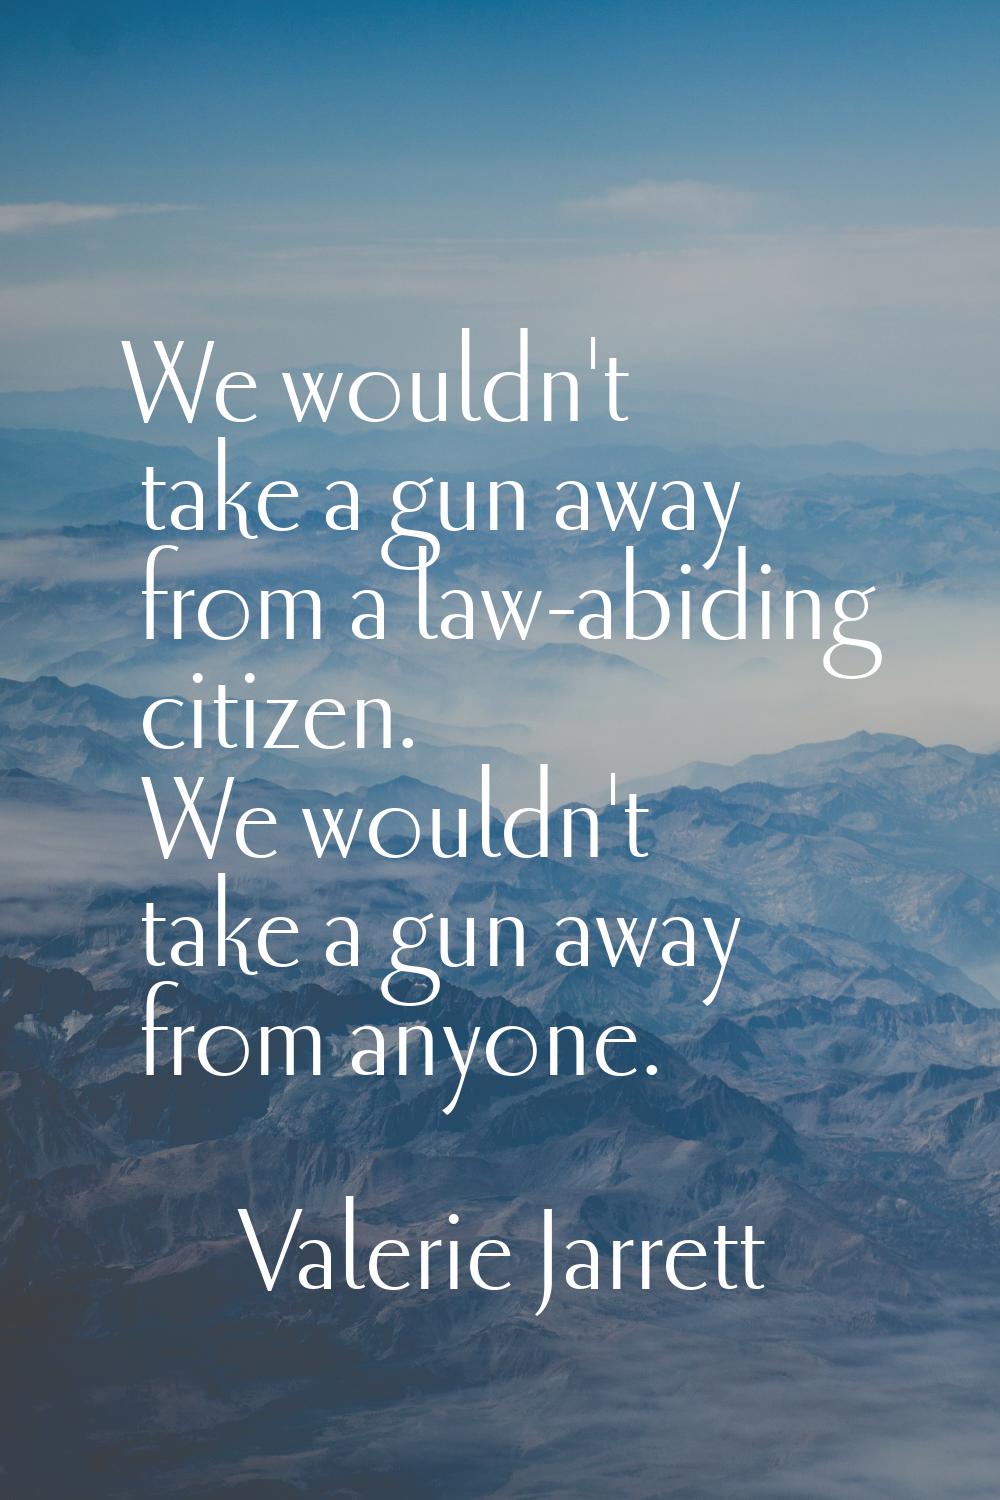 We wouldn't take a gun away from a law-abiding citizen. We wouldn't take a gun away from anyone.